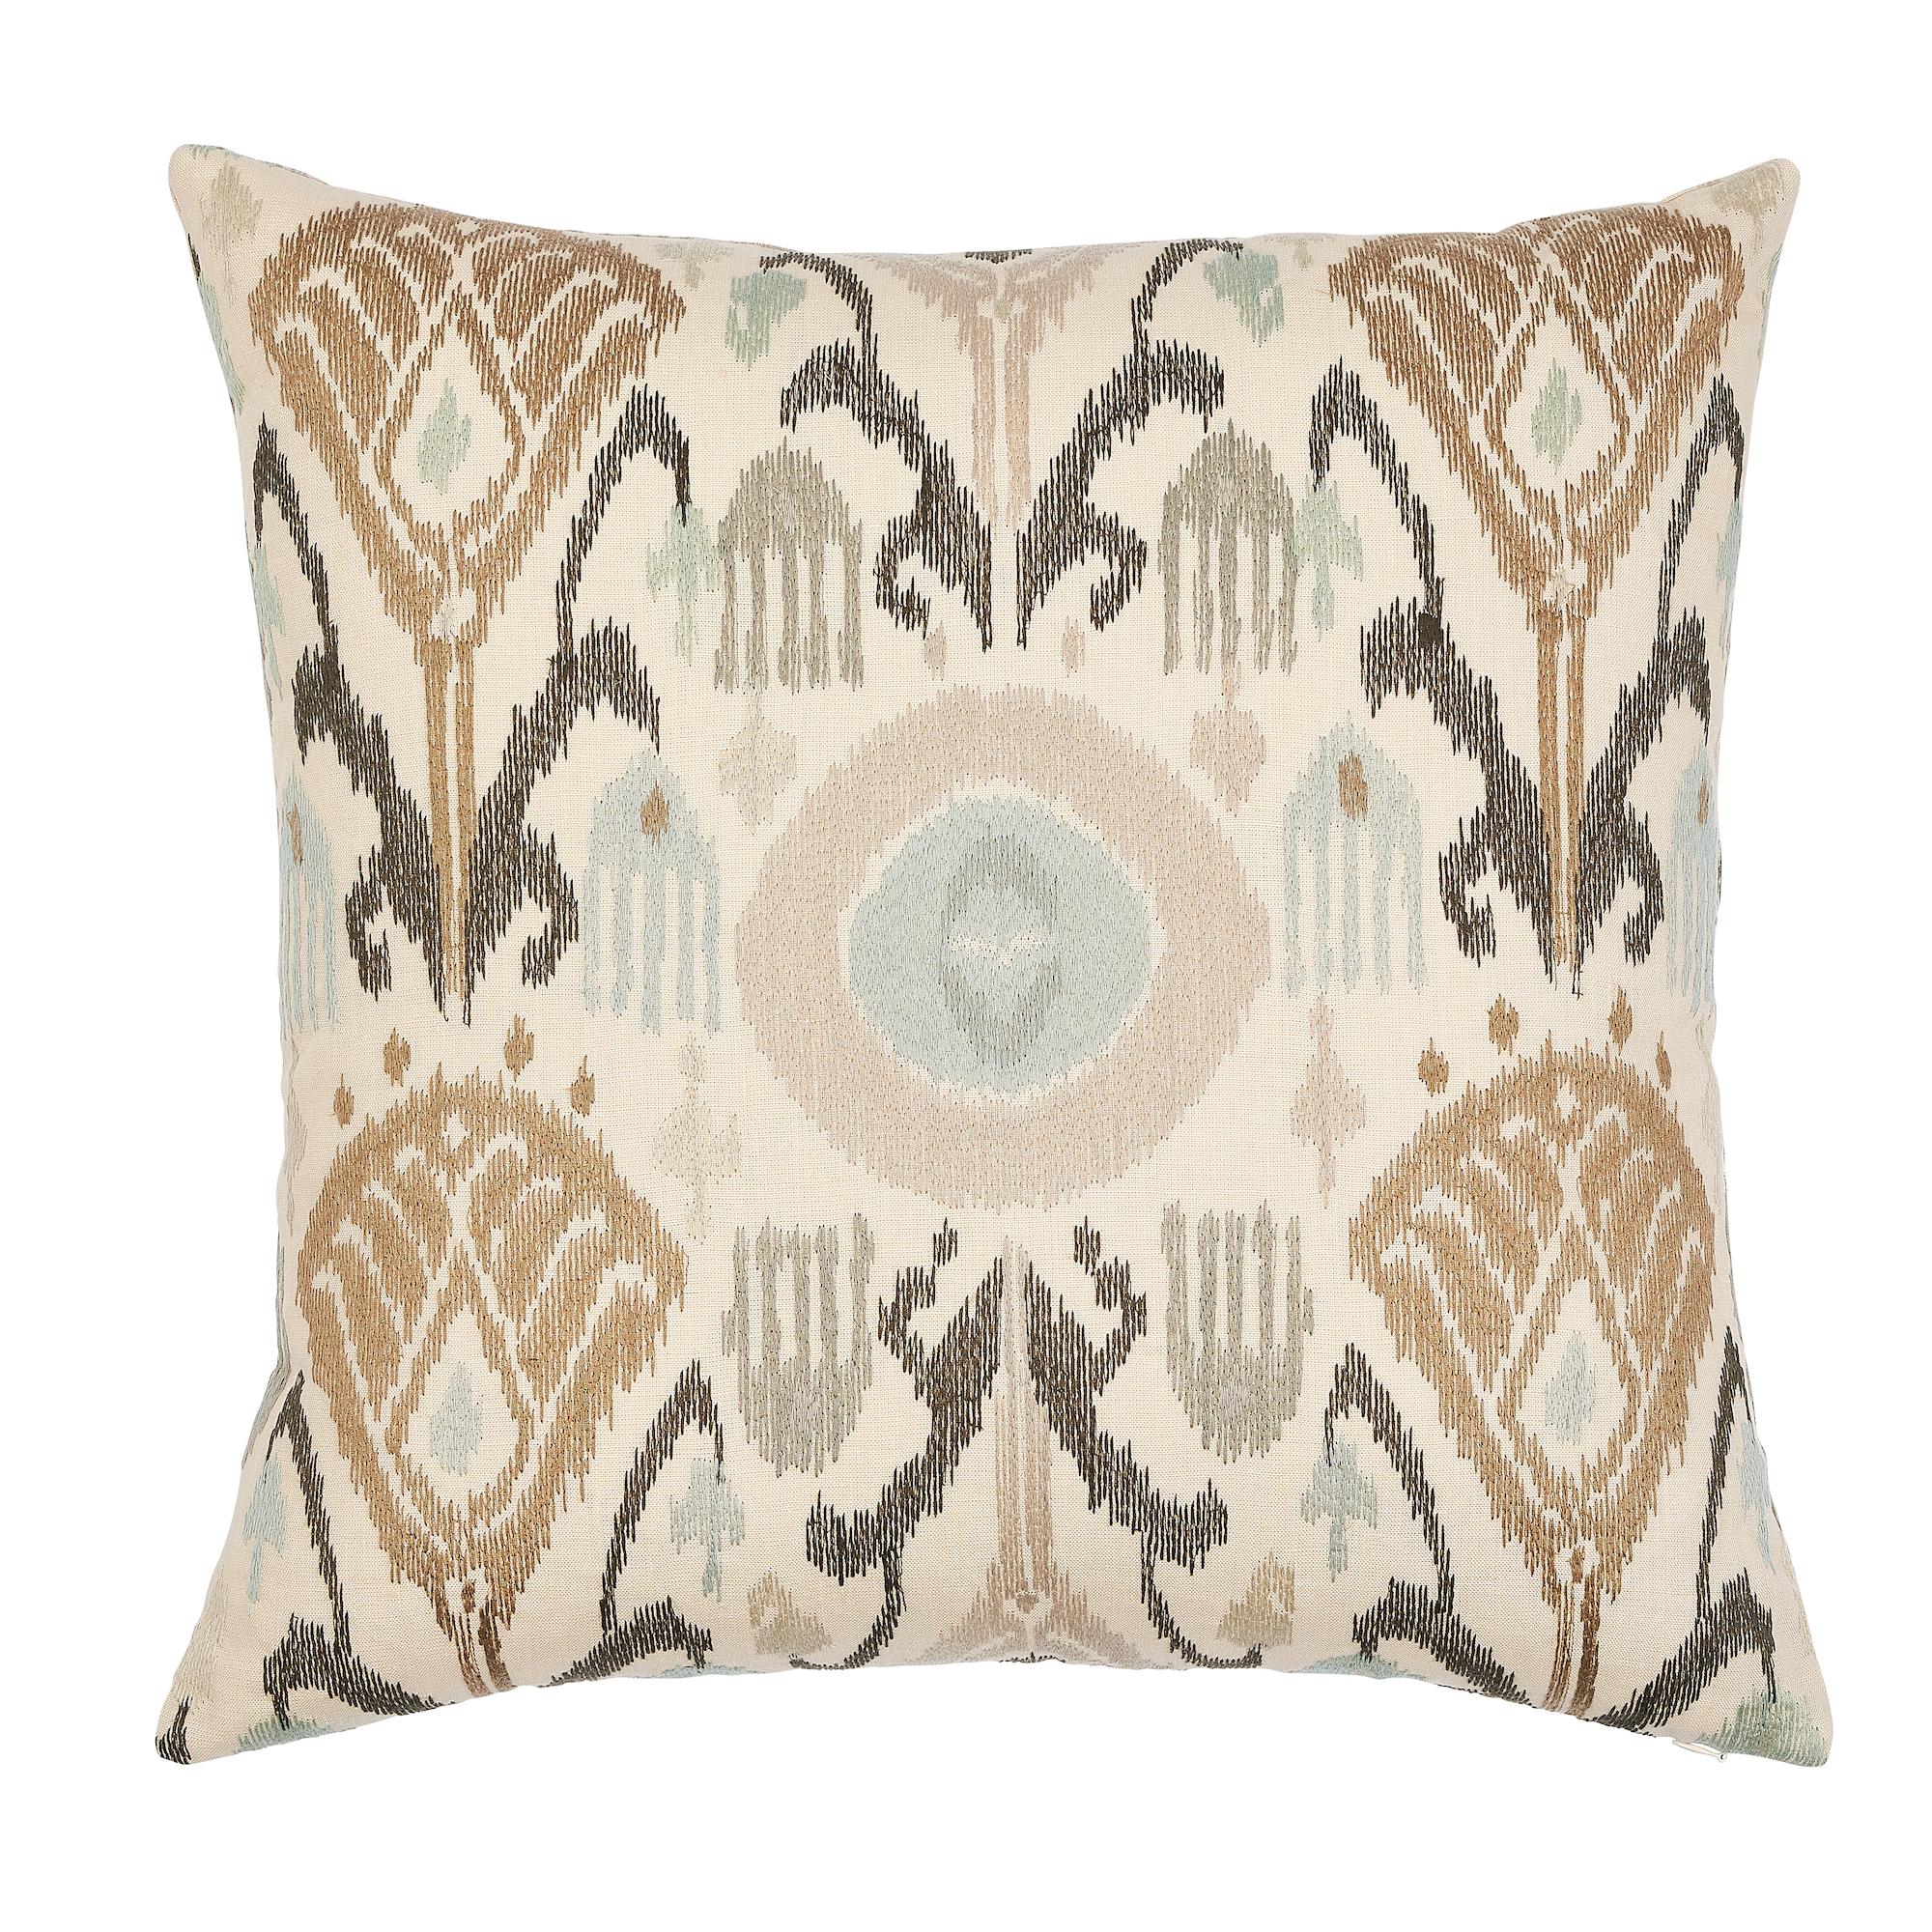 This pillow features Turkestan Embroidery with a knife edge finish. Inspired by a silk ikat from Central Asia, this embroidered pattern is a contemporary take on a classic design. Satin stitches create a wonderfully graphic and dimensional pattern.